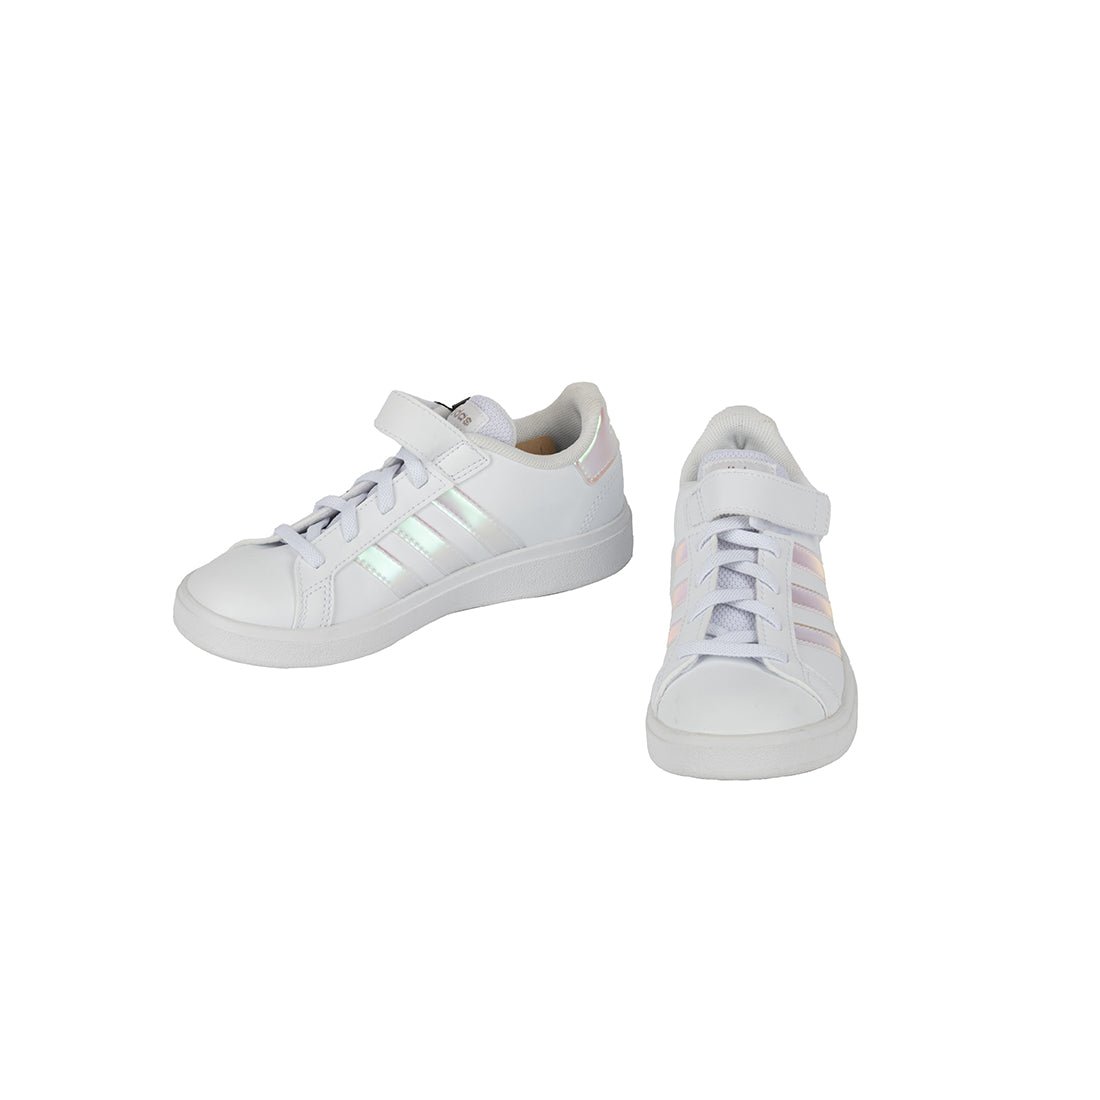 Adidas Brand New Shoes for Girls - mymadstore.com